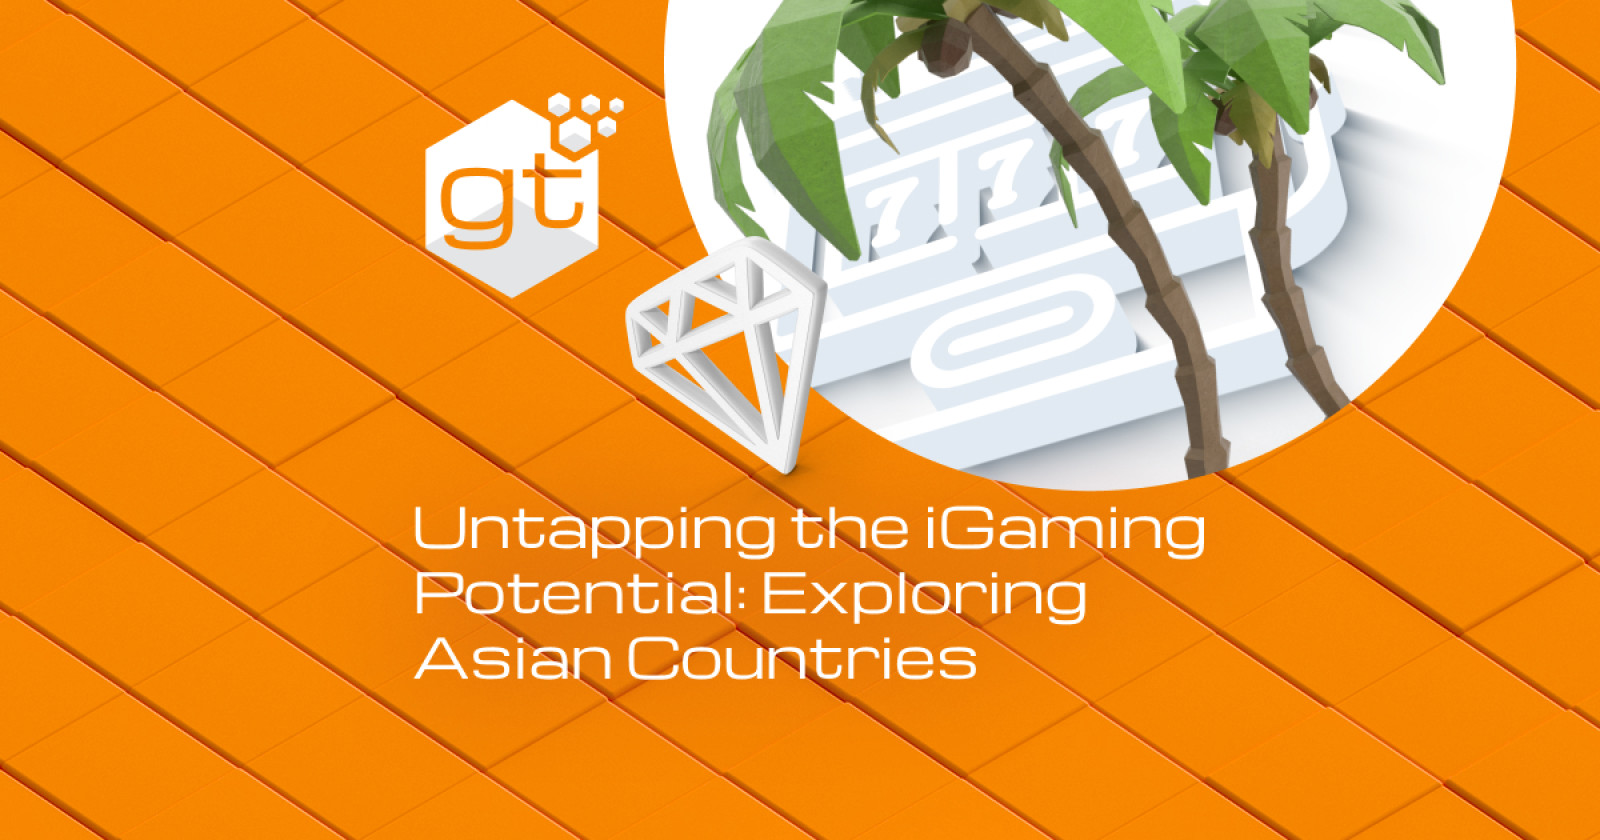 Exploring iGaming’s Untapped Potential In Asian Nations